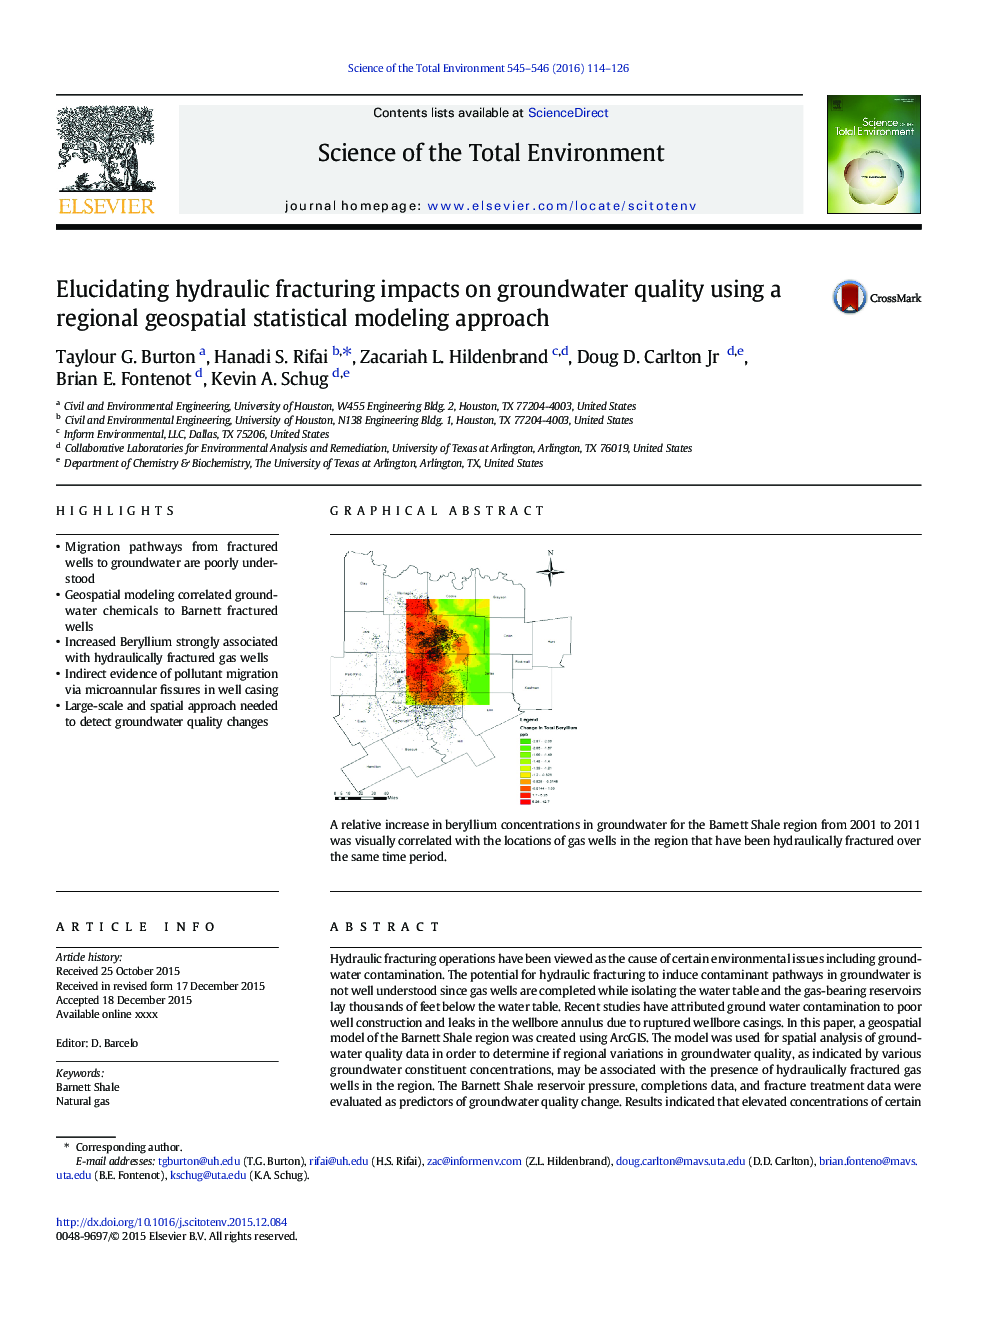 Elucidating hydraulic fracturing impacts on groundwater quality using a regional geospatial statistical modeling approach